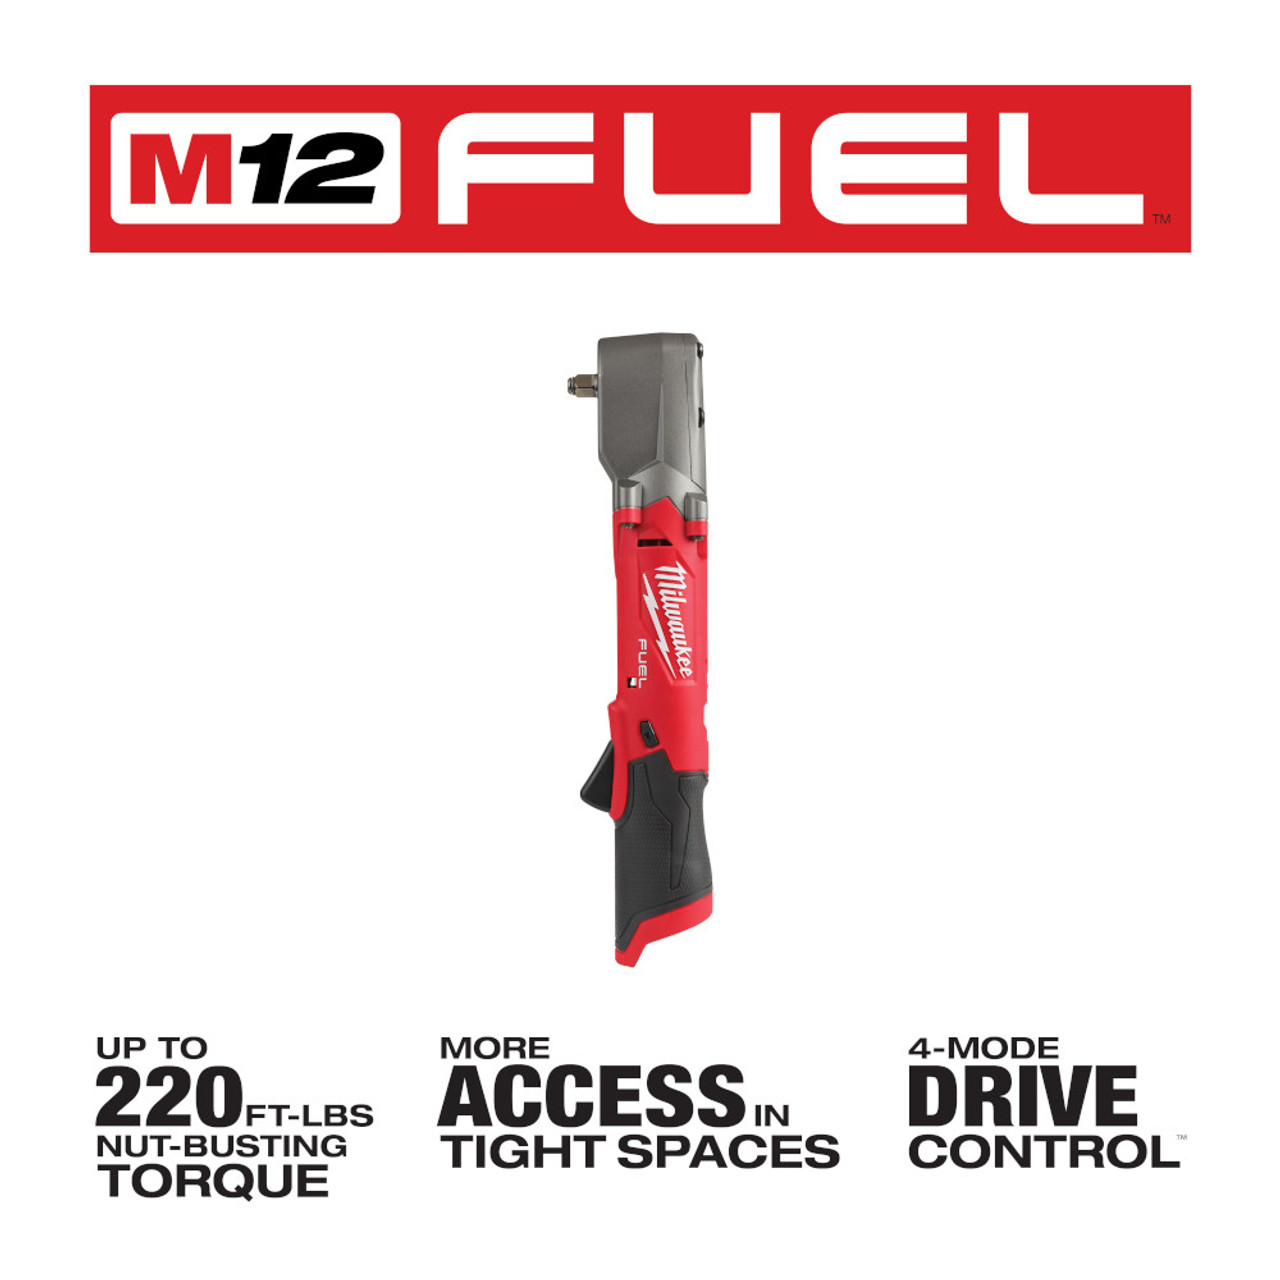 M12 FUEL 12 Volt Lithium-Ion Brushless Cordless 3/8 in. Right Angle Impact  Wrench Tool Only